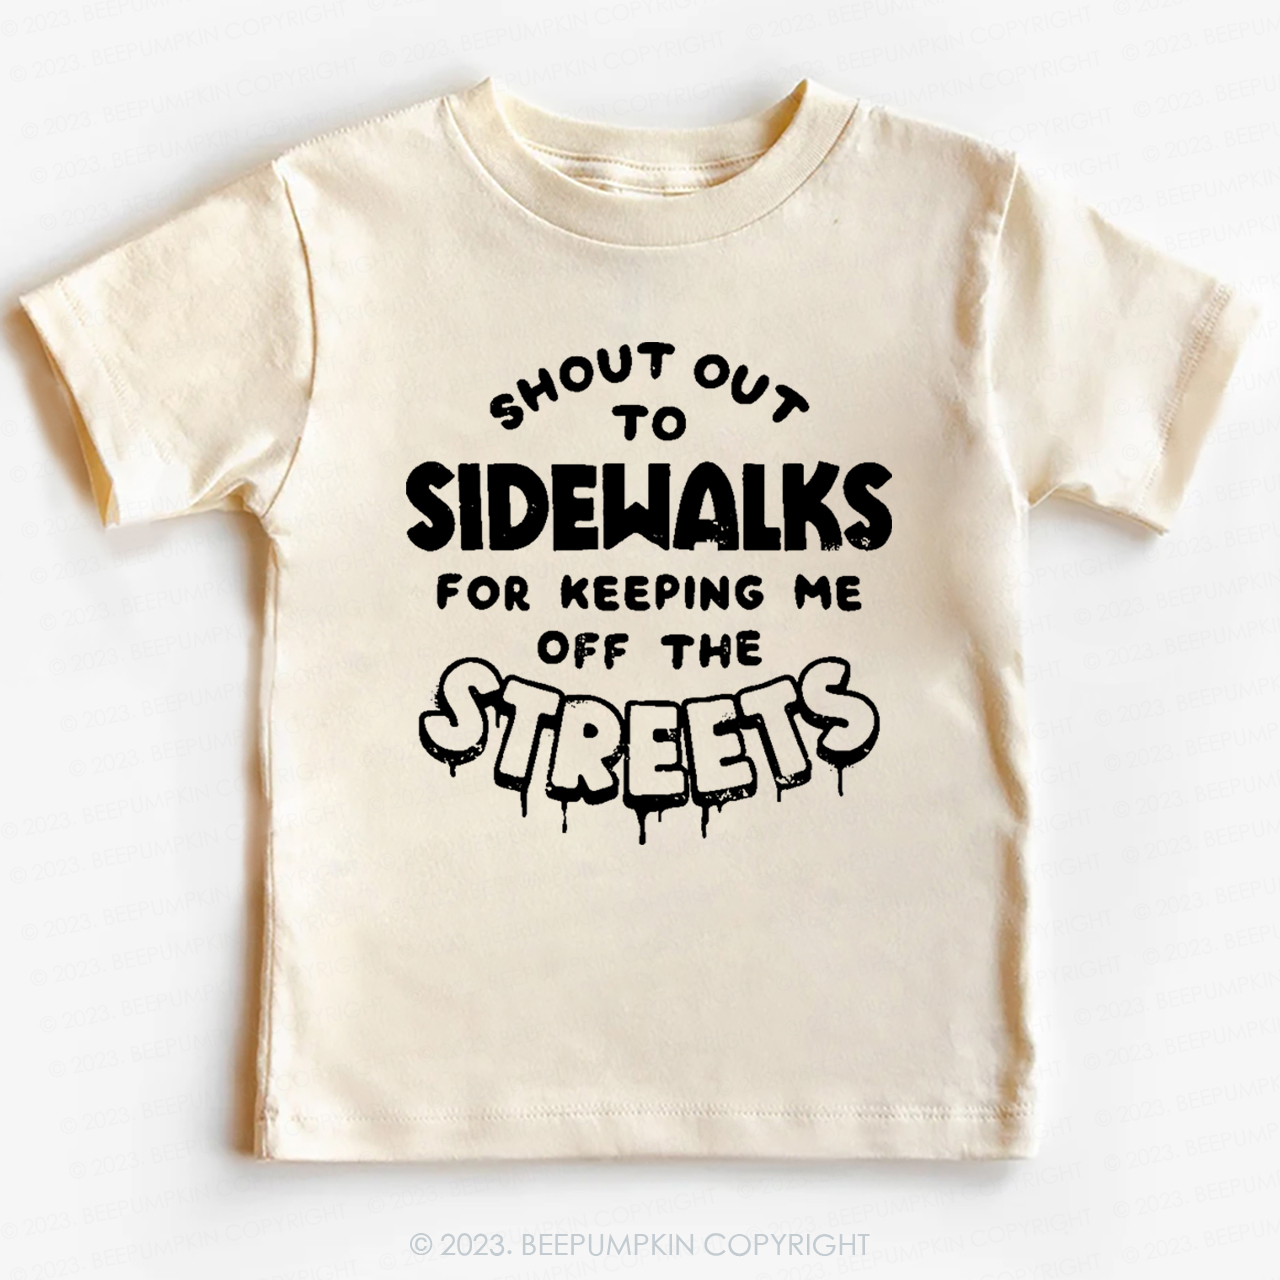 Shout Out To Sidewalks For Keeping Me Off The Streets -Toddler Tees